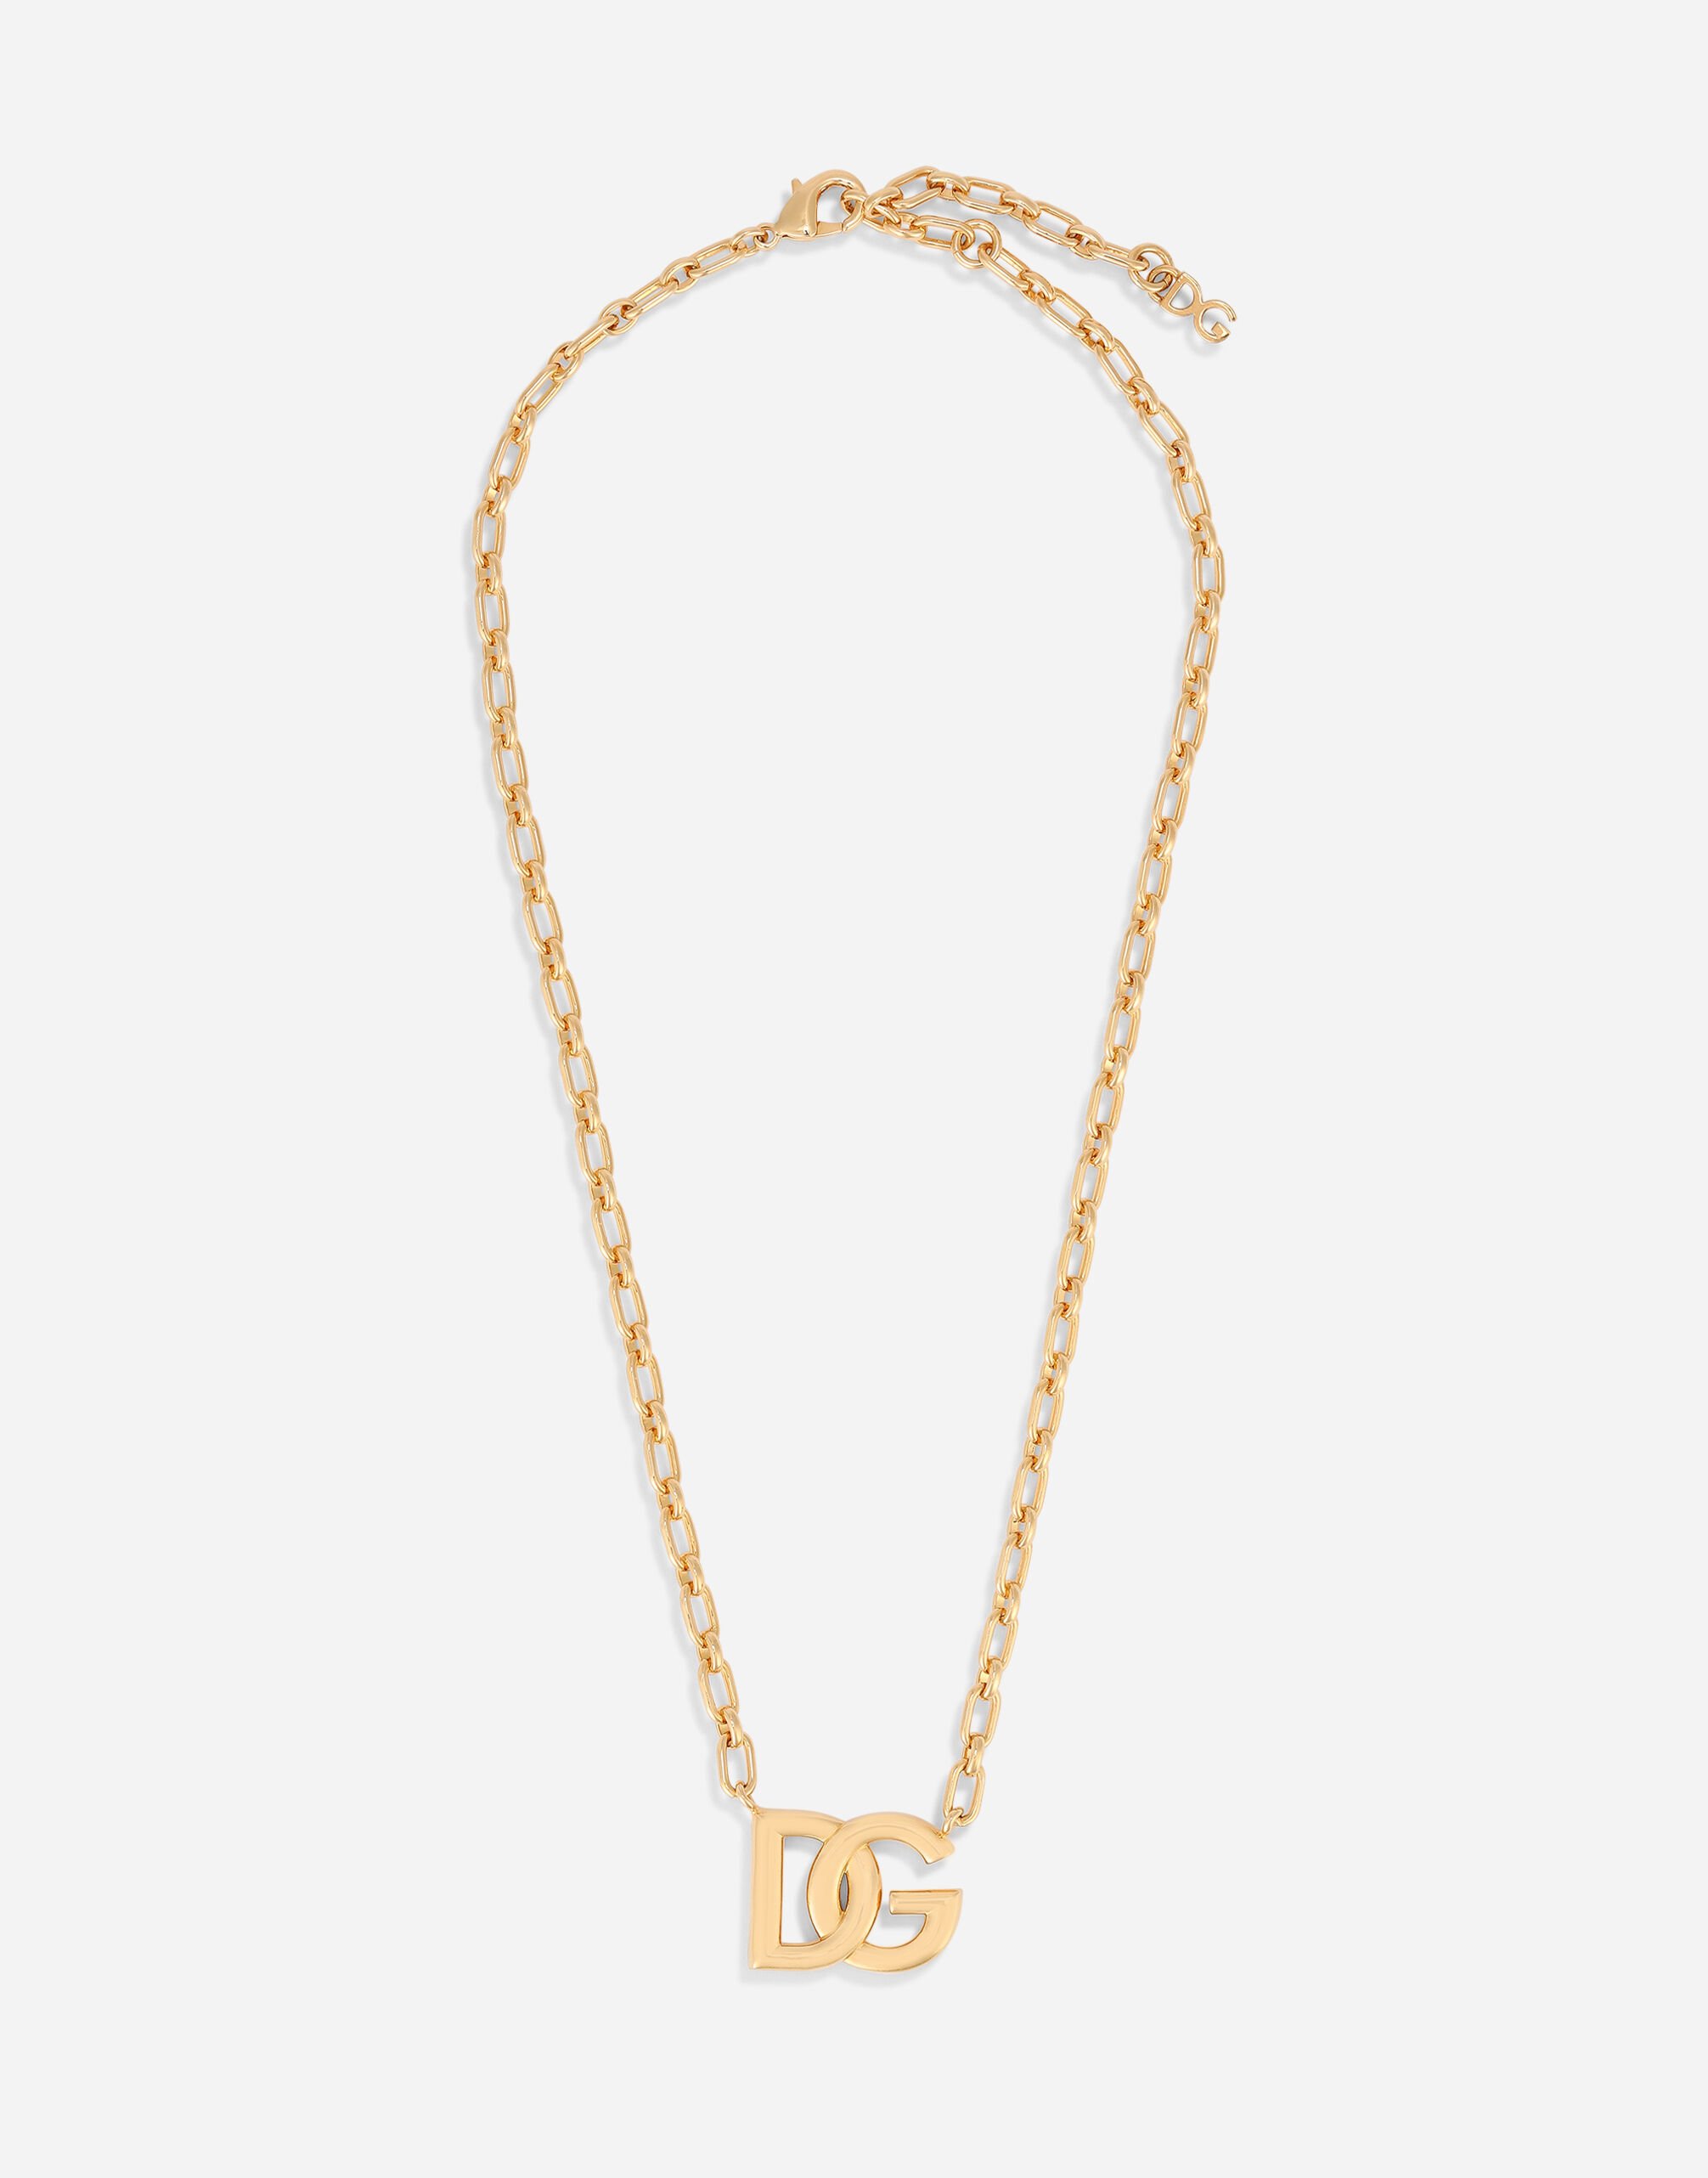 ${brand} Chain necklace with DG logo ${colorDescription} ${masterID}